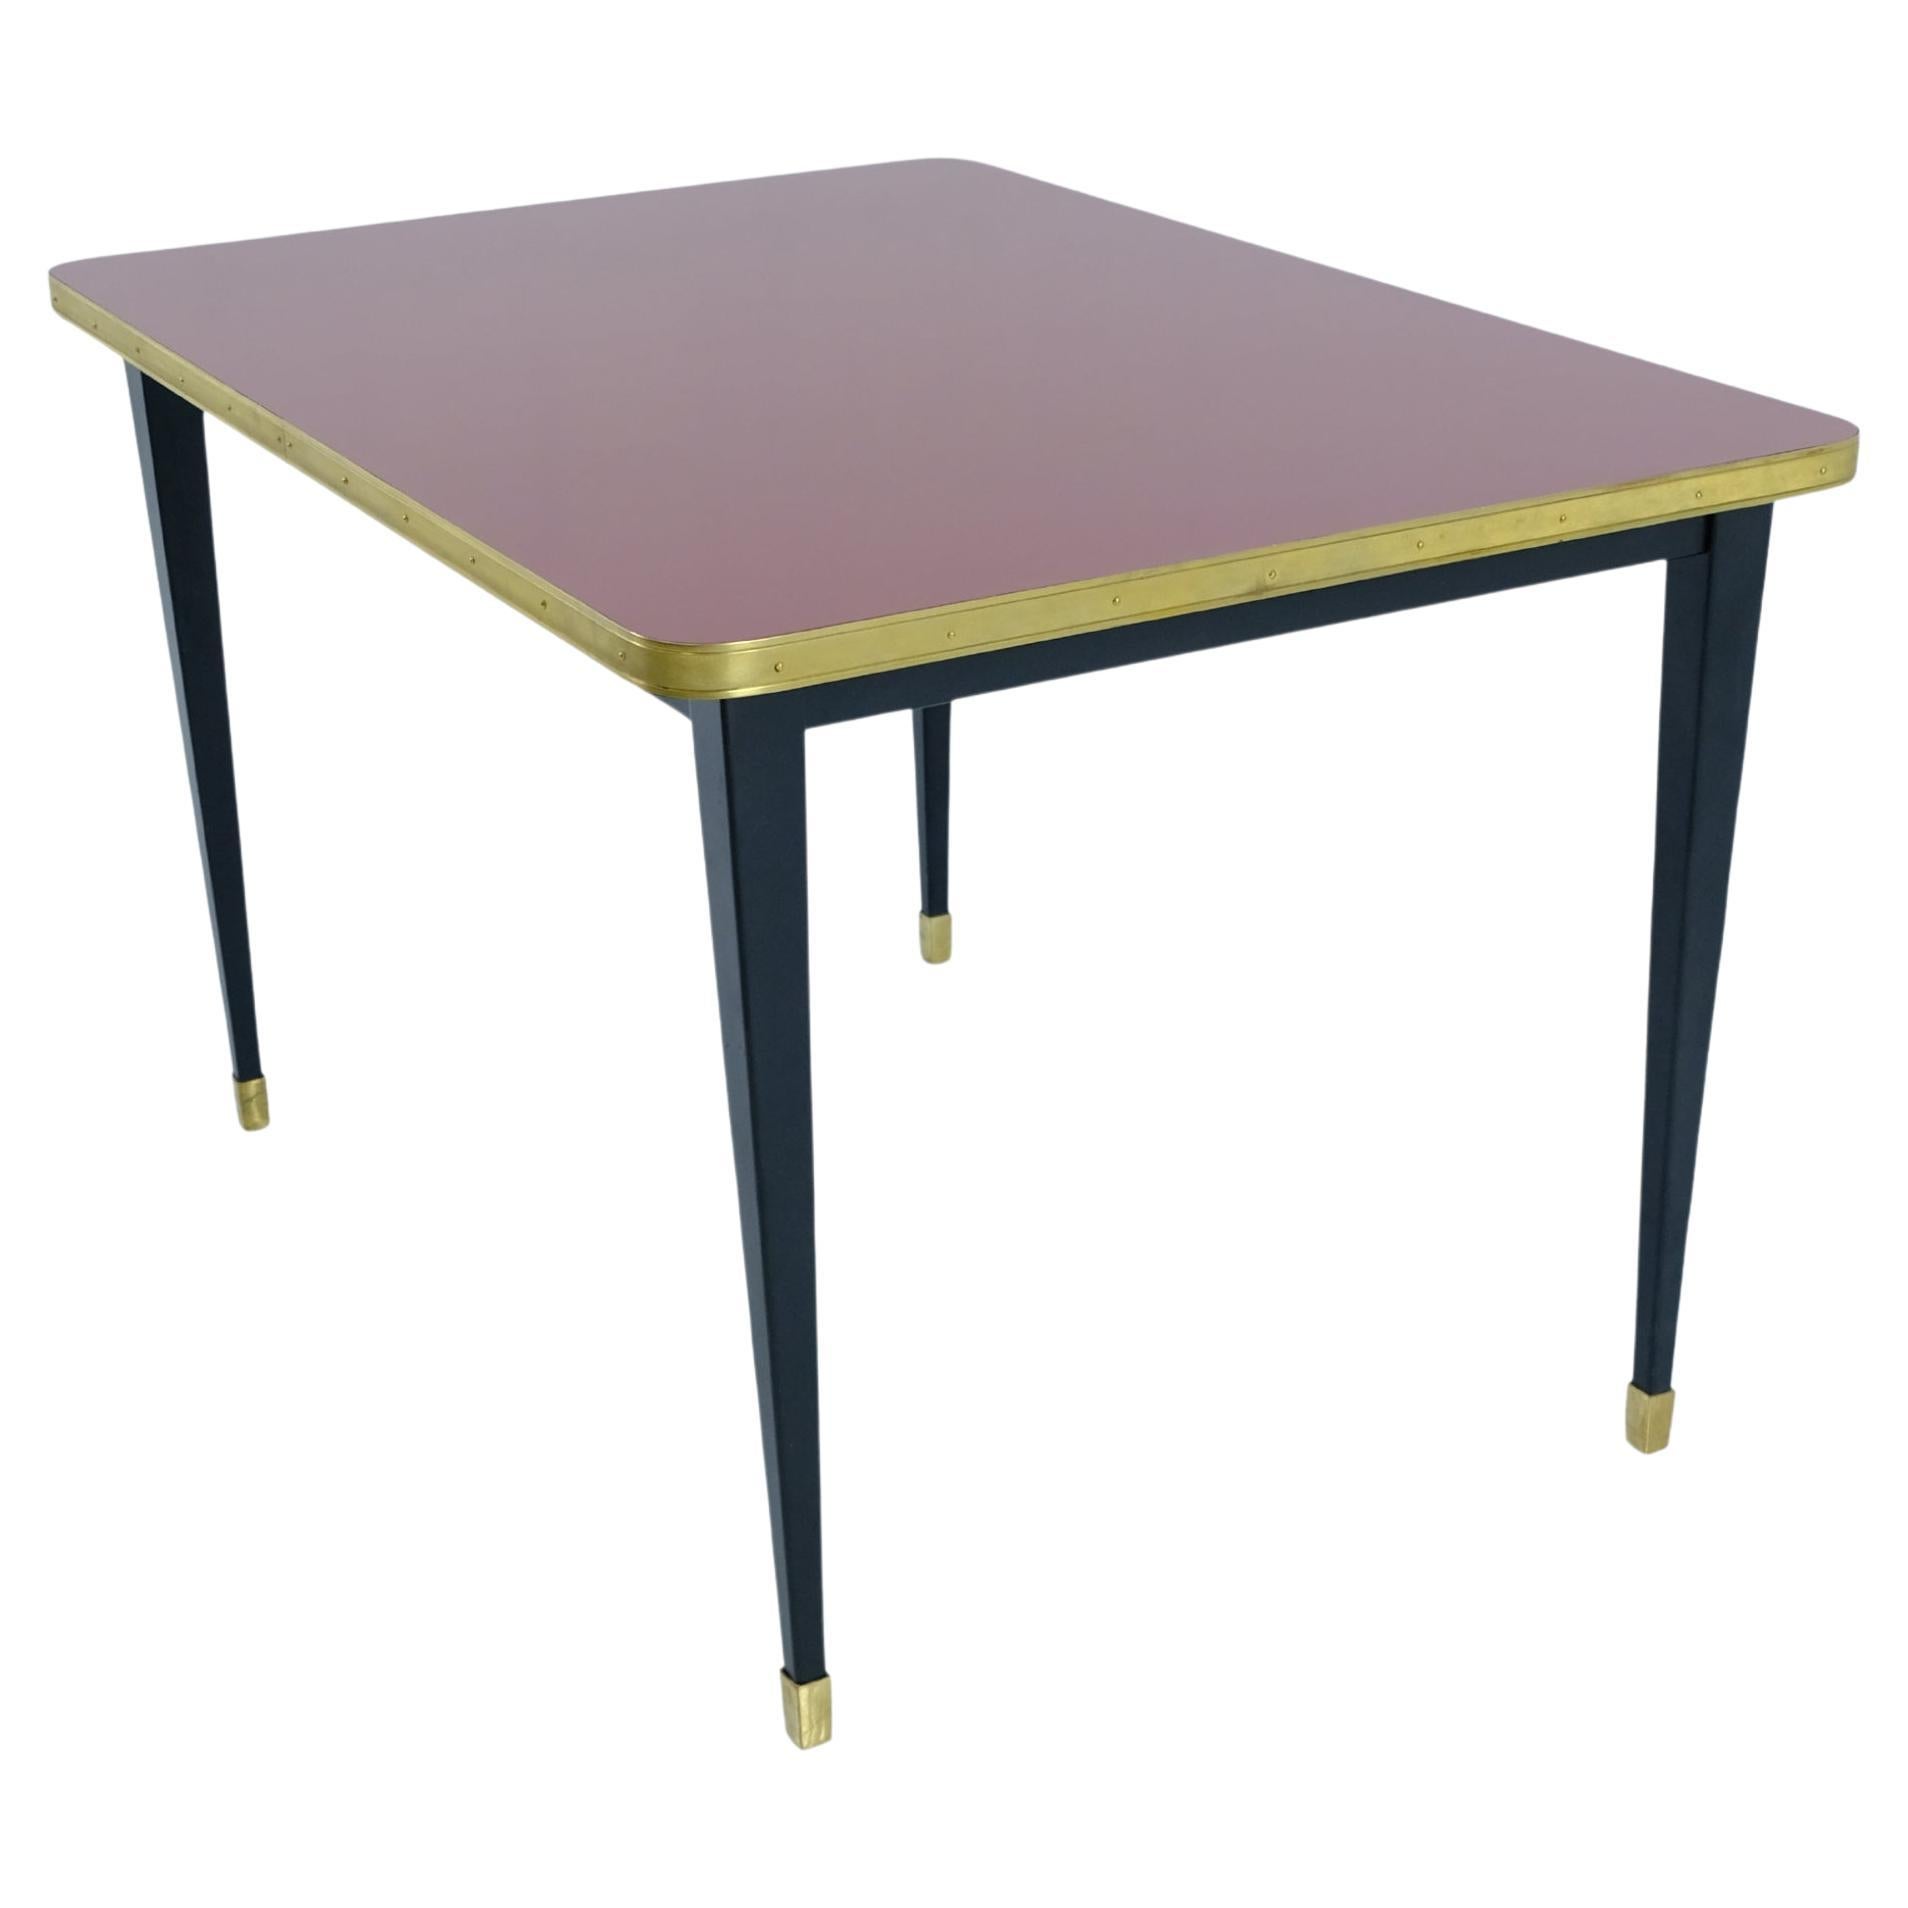 Dinning Table, High Gloss Laminate, Brass, Conic Legs, Burgundy - L For Sale